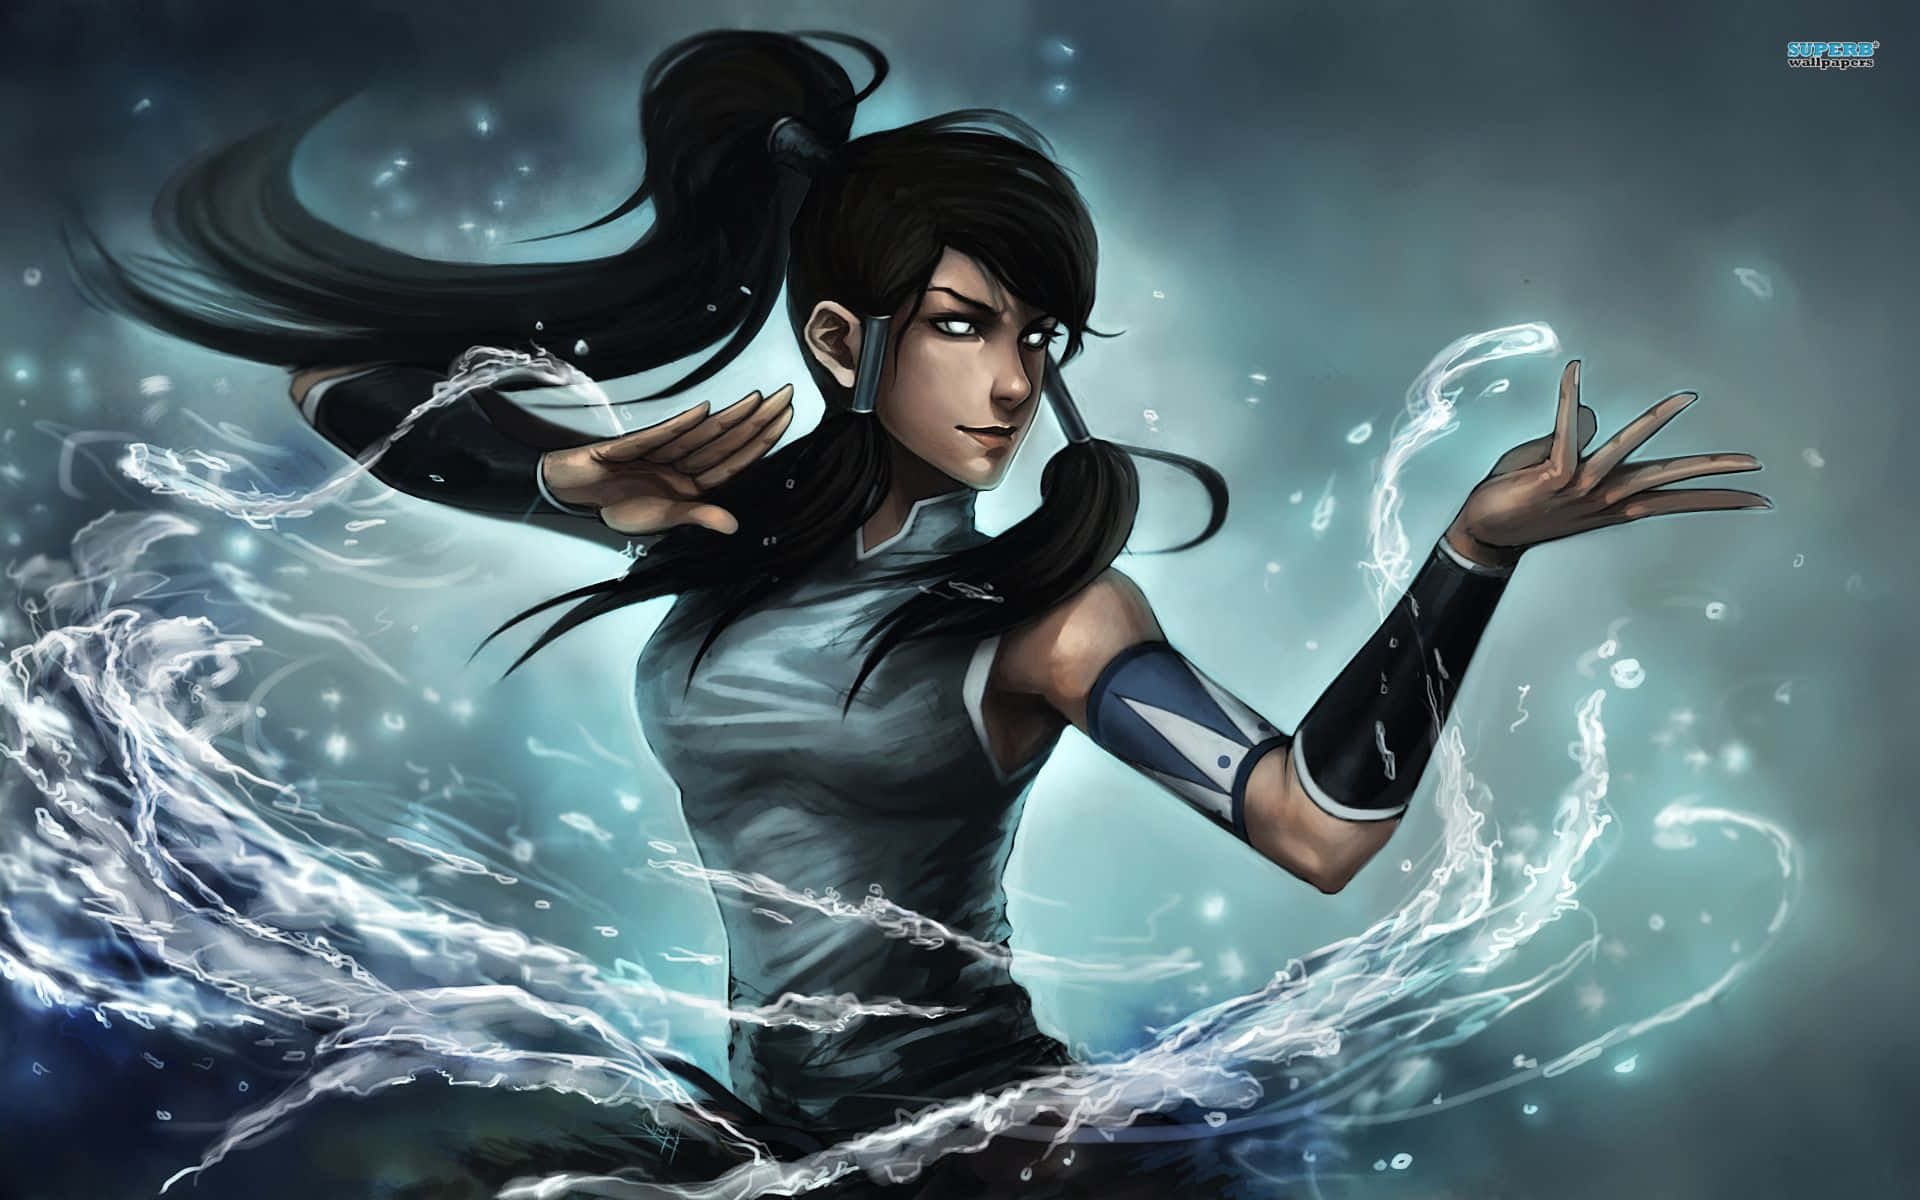 The Avatar State - Korra stands in front of the Avatar Symbol Wallpaper